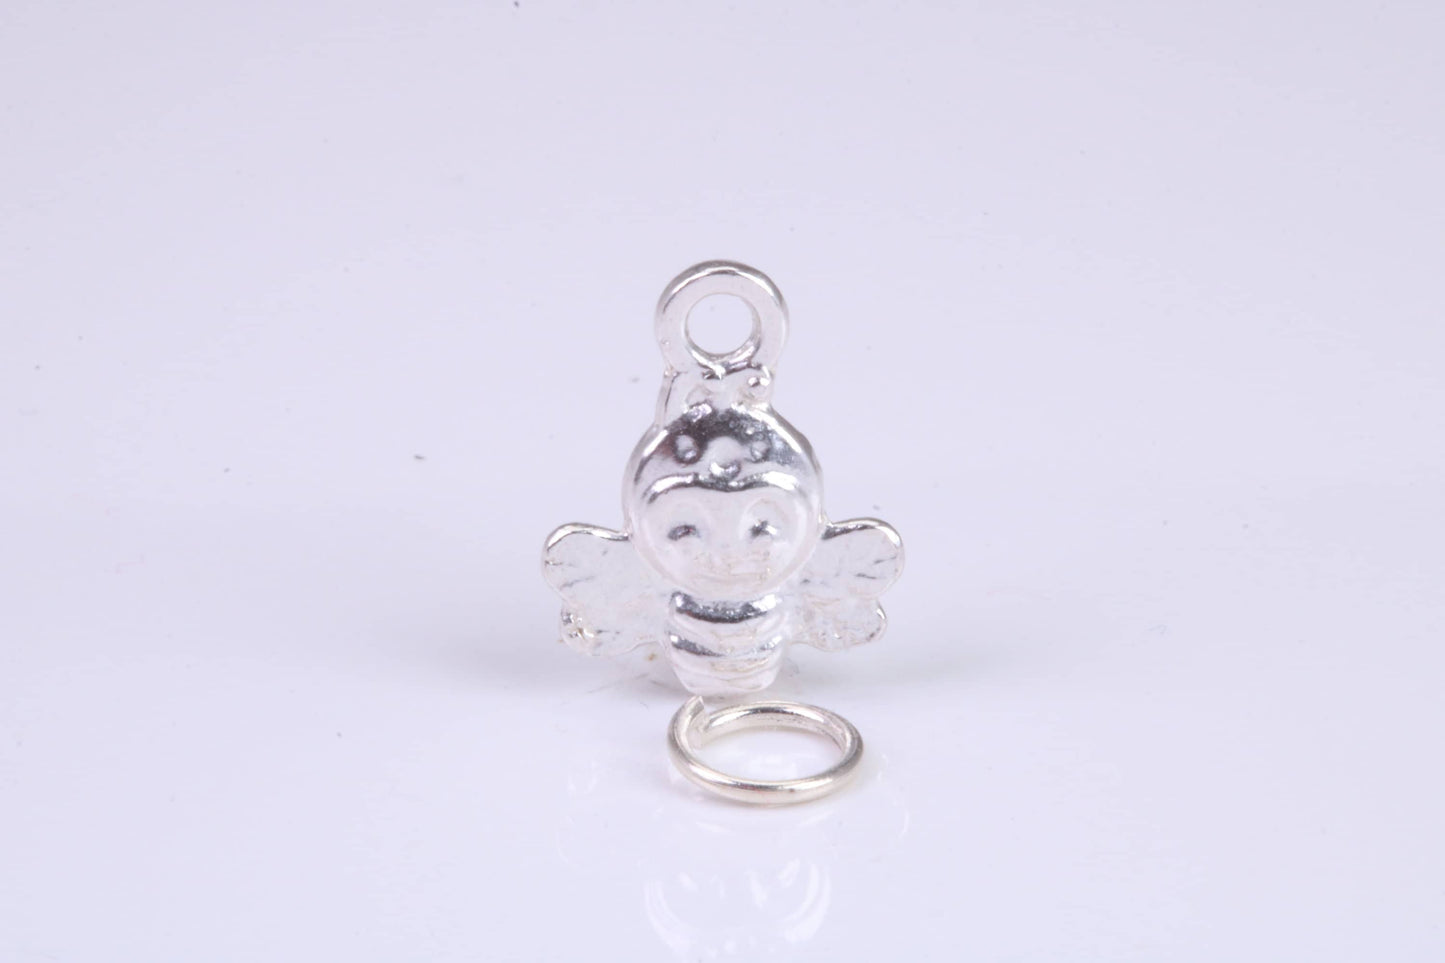 Bird Charm, Traditional Charm, Made from Solid 925 Grade Sterling Silver, Complete with Attachment Link